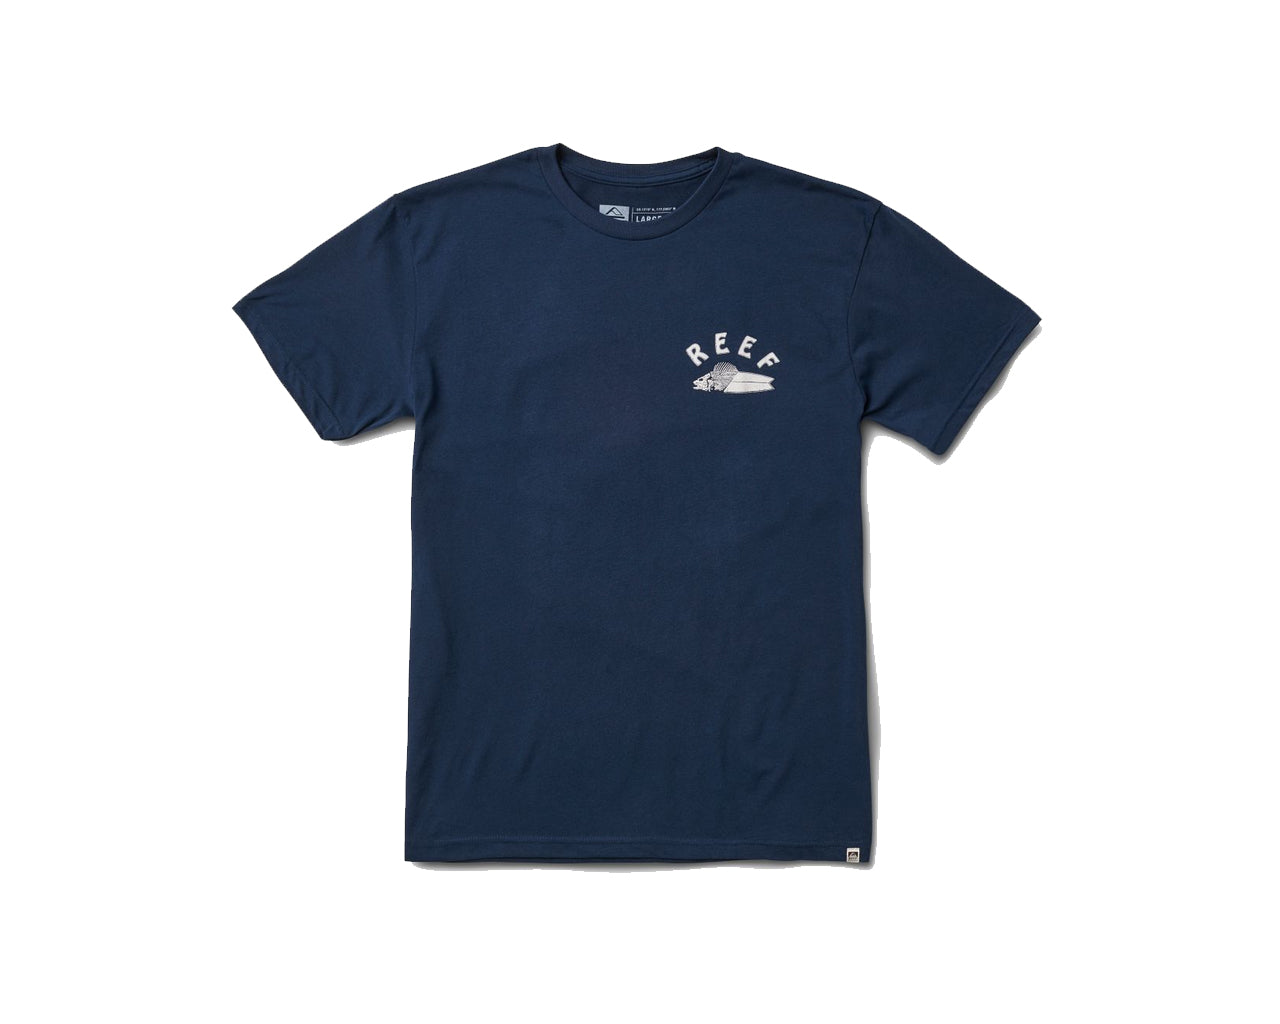 Reef Here SS Tee NVY-Navy S